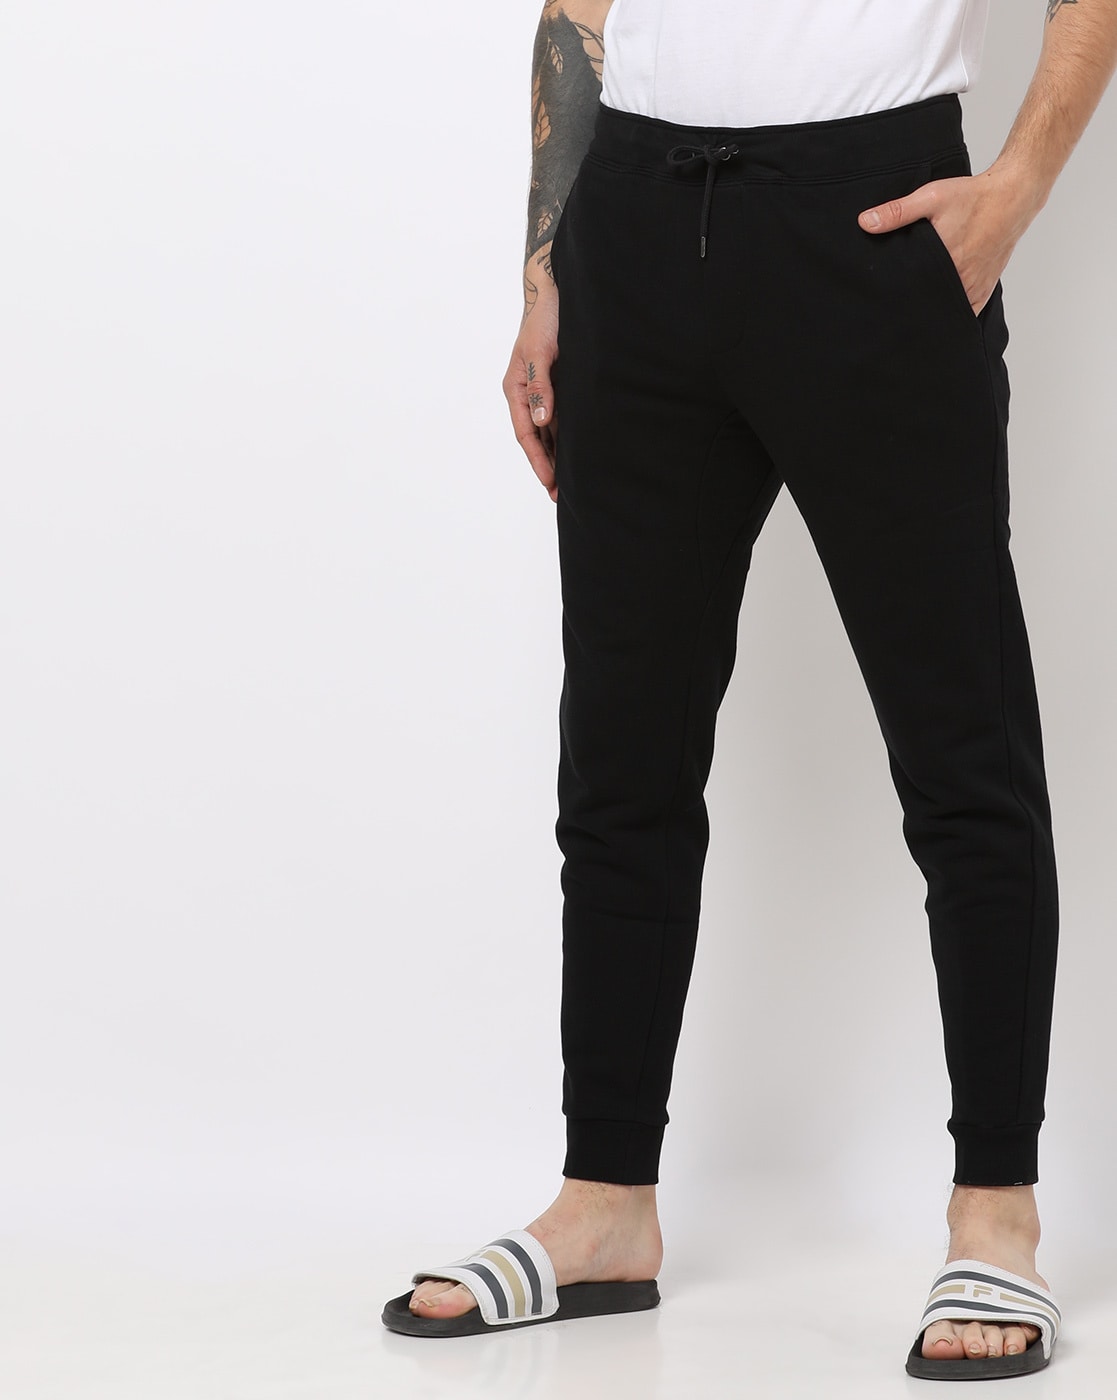 relaxed fit jogger pants